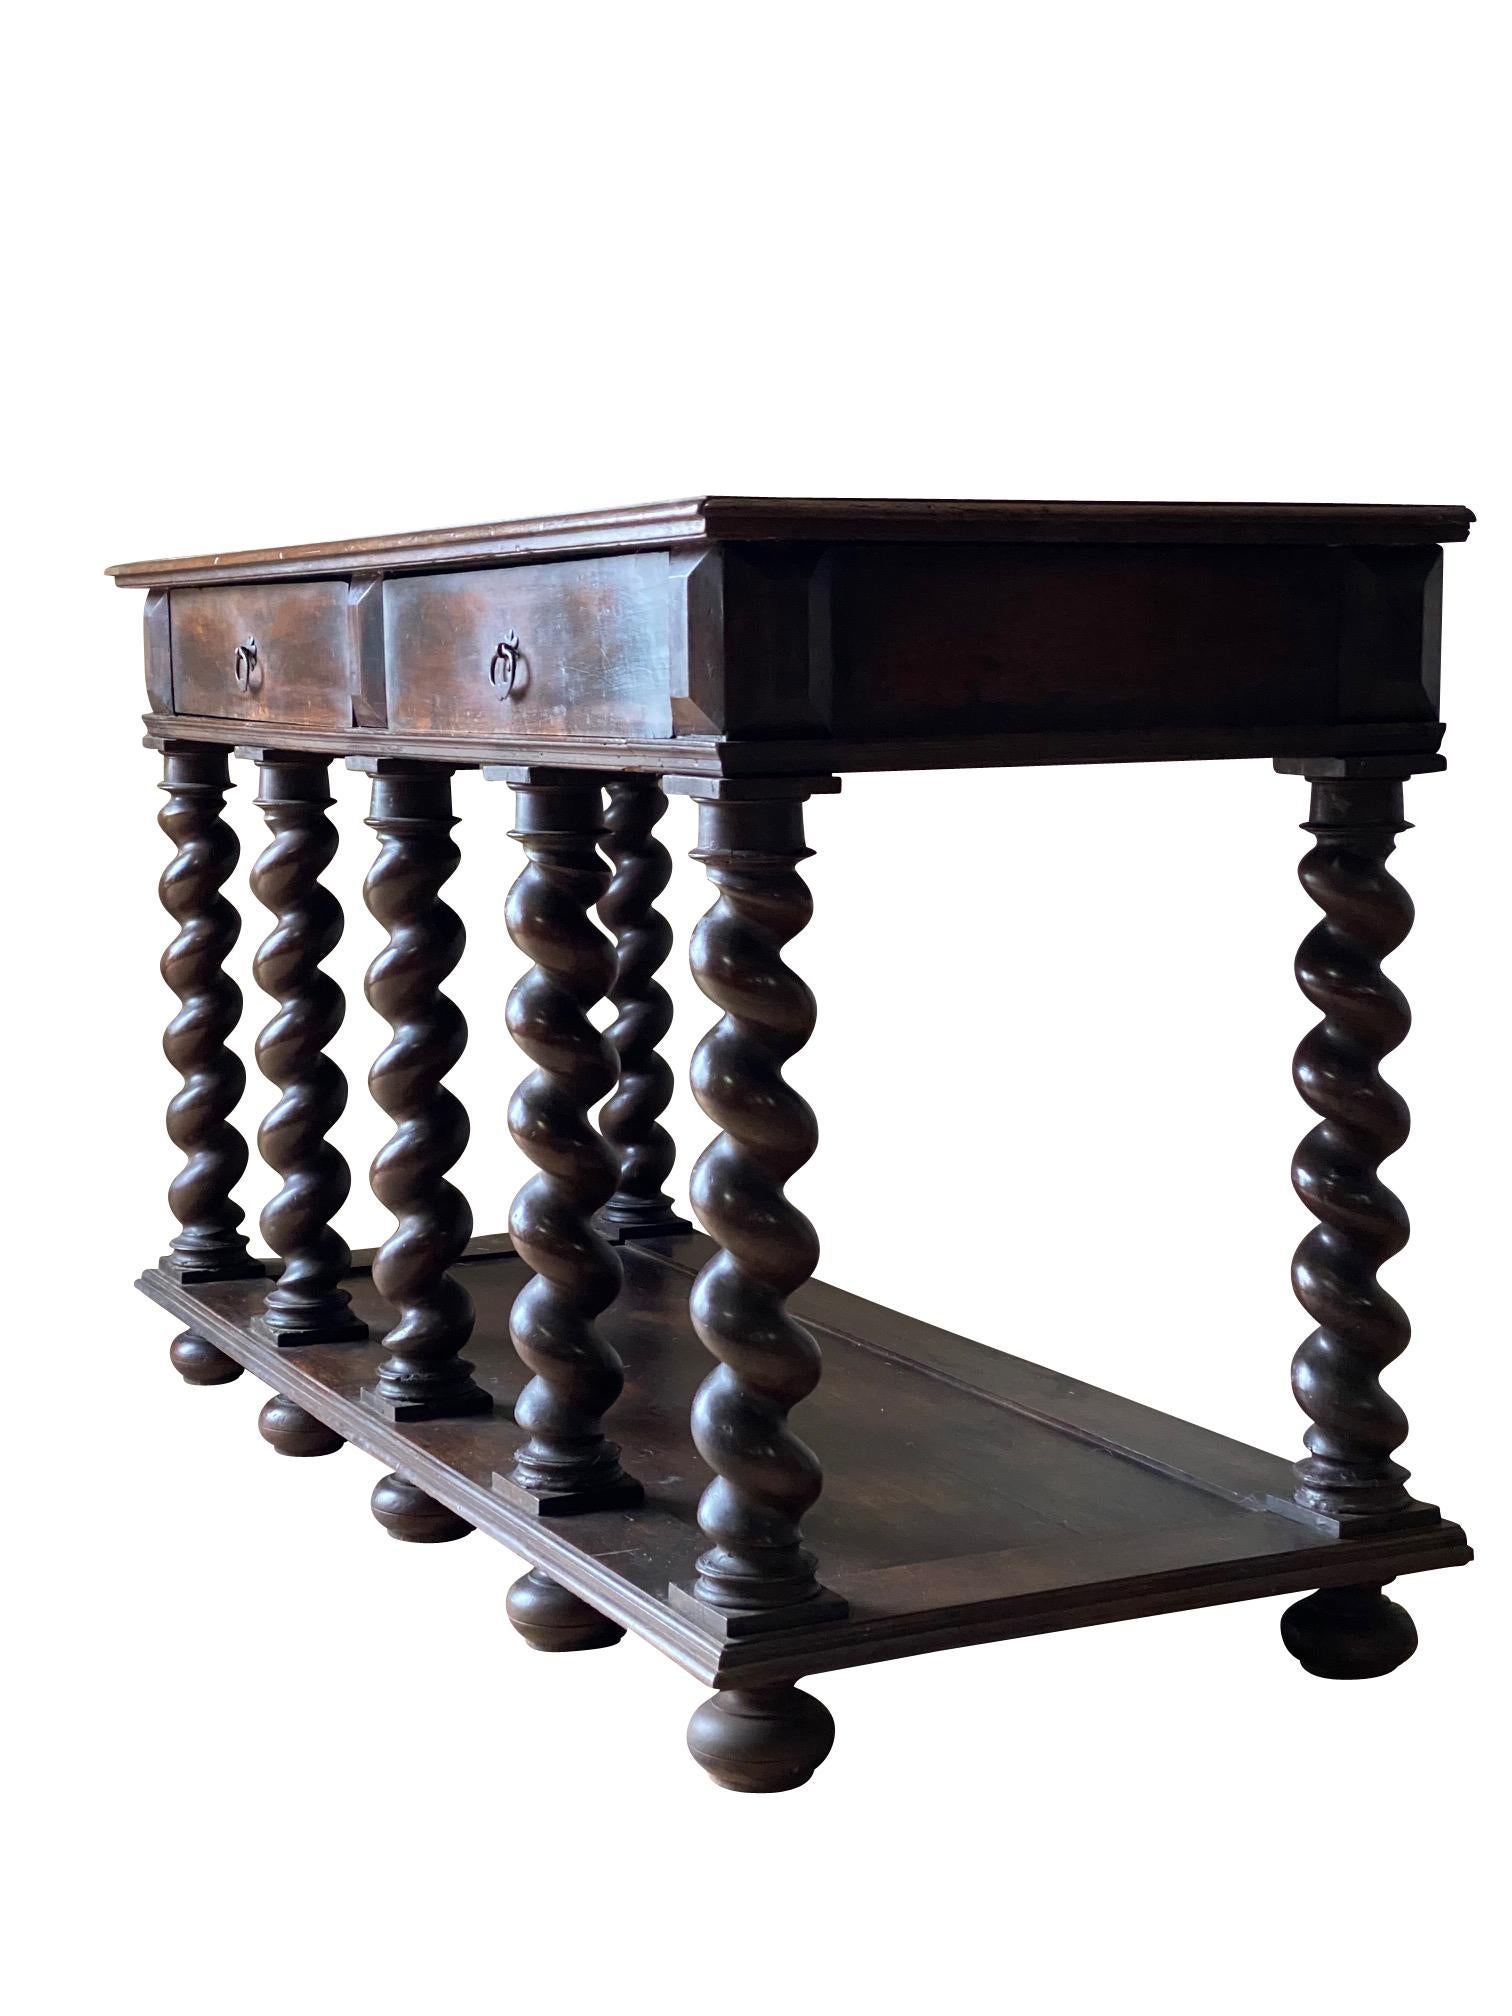 18th century Italian two-drawer walnut console.
The console has seven turned legs and a lower tier shelf.
Recently refinished.
 